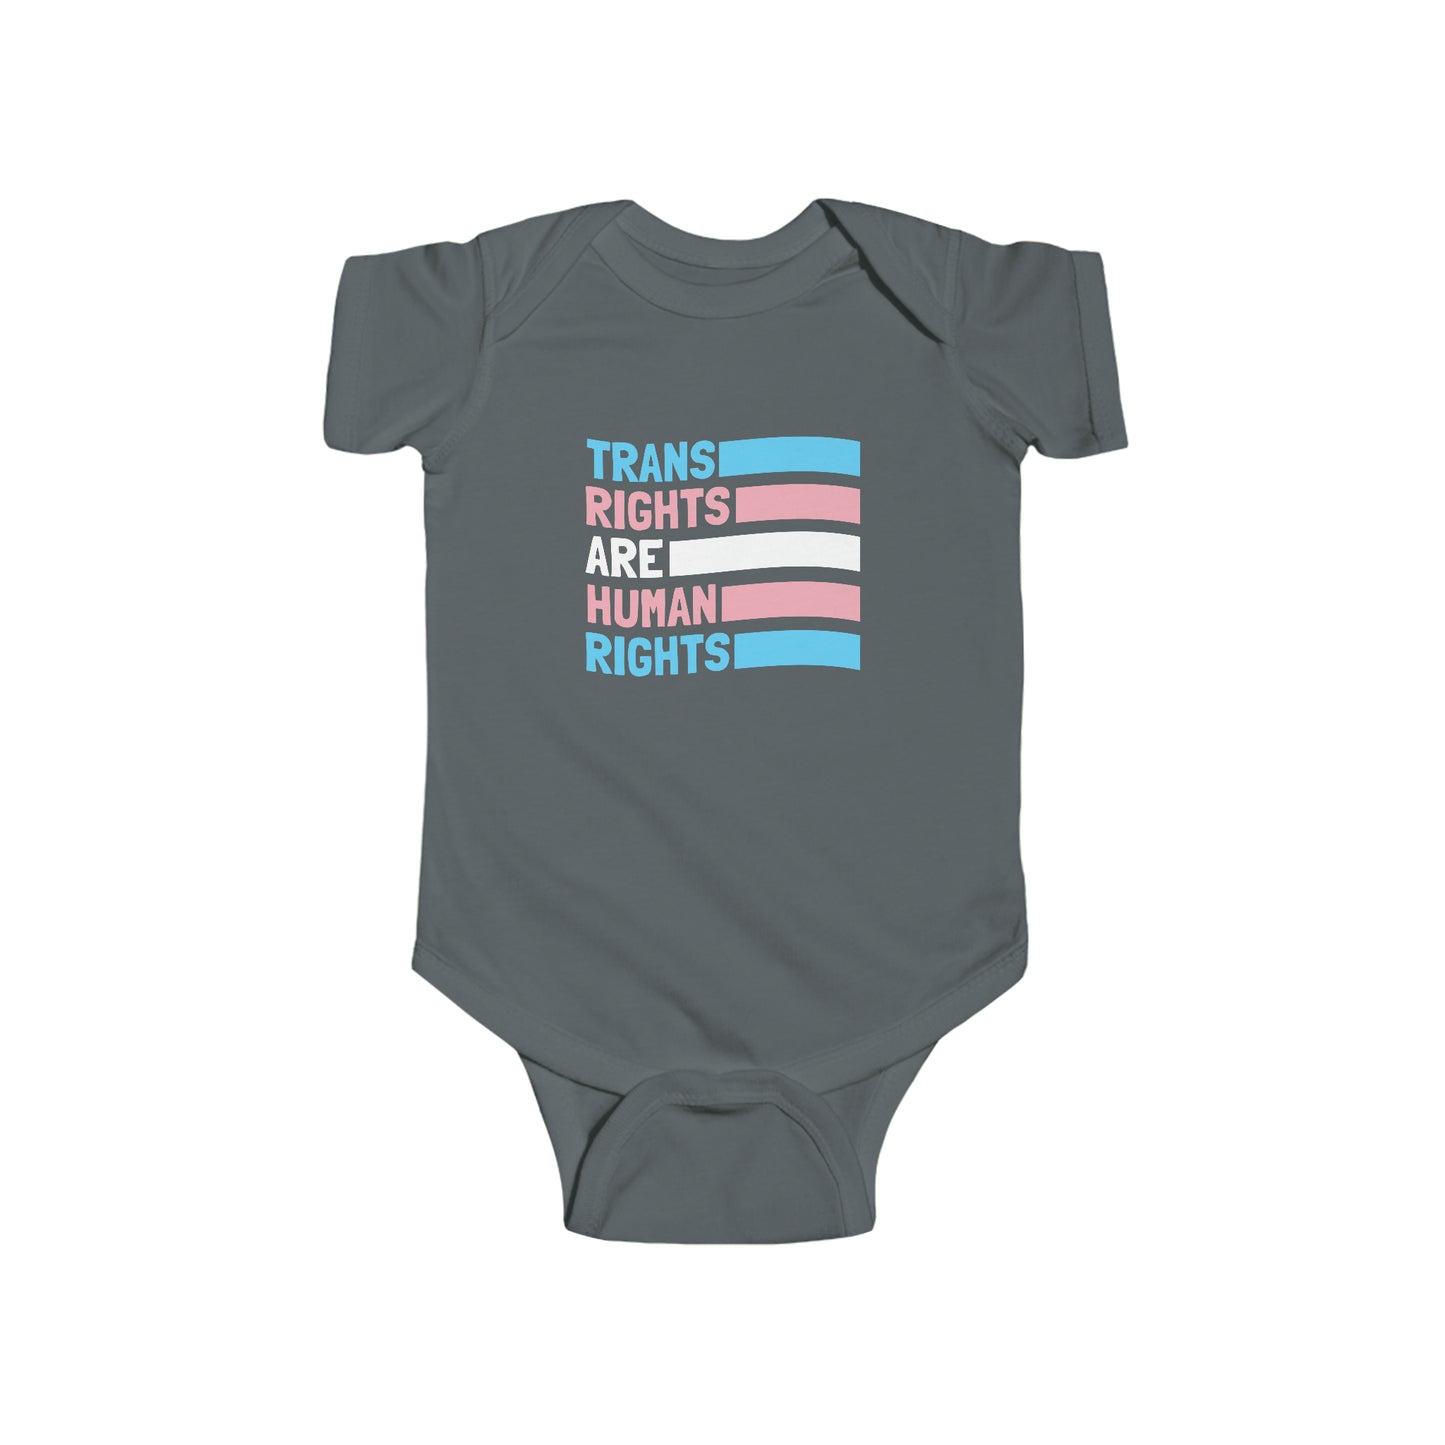 “Trans Rights Are Human Rights” Infant Onesie